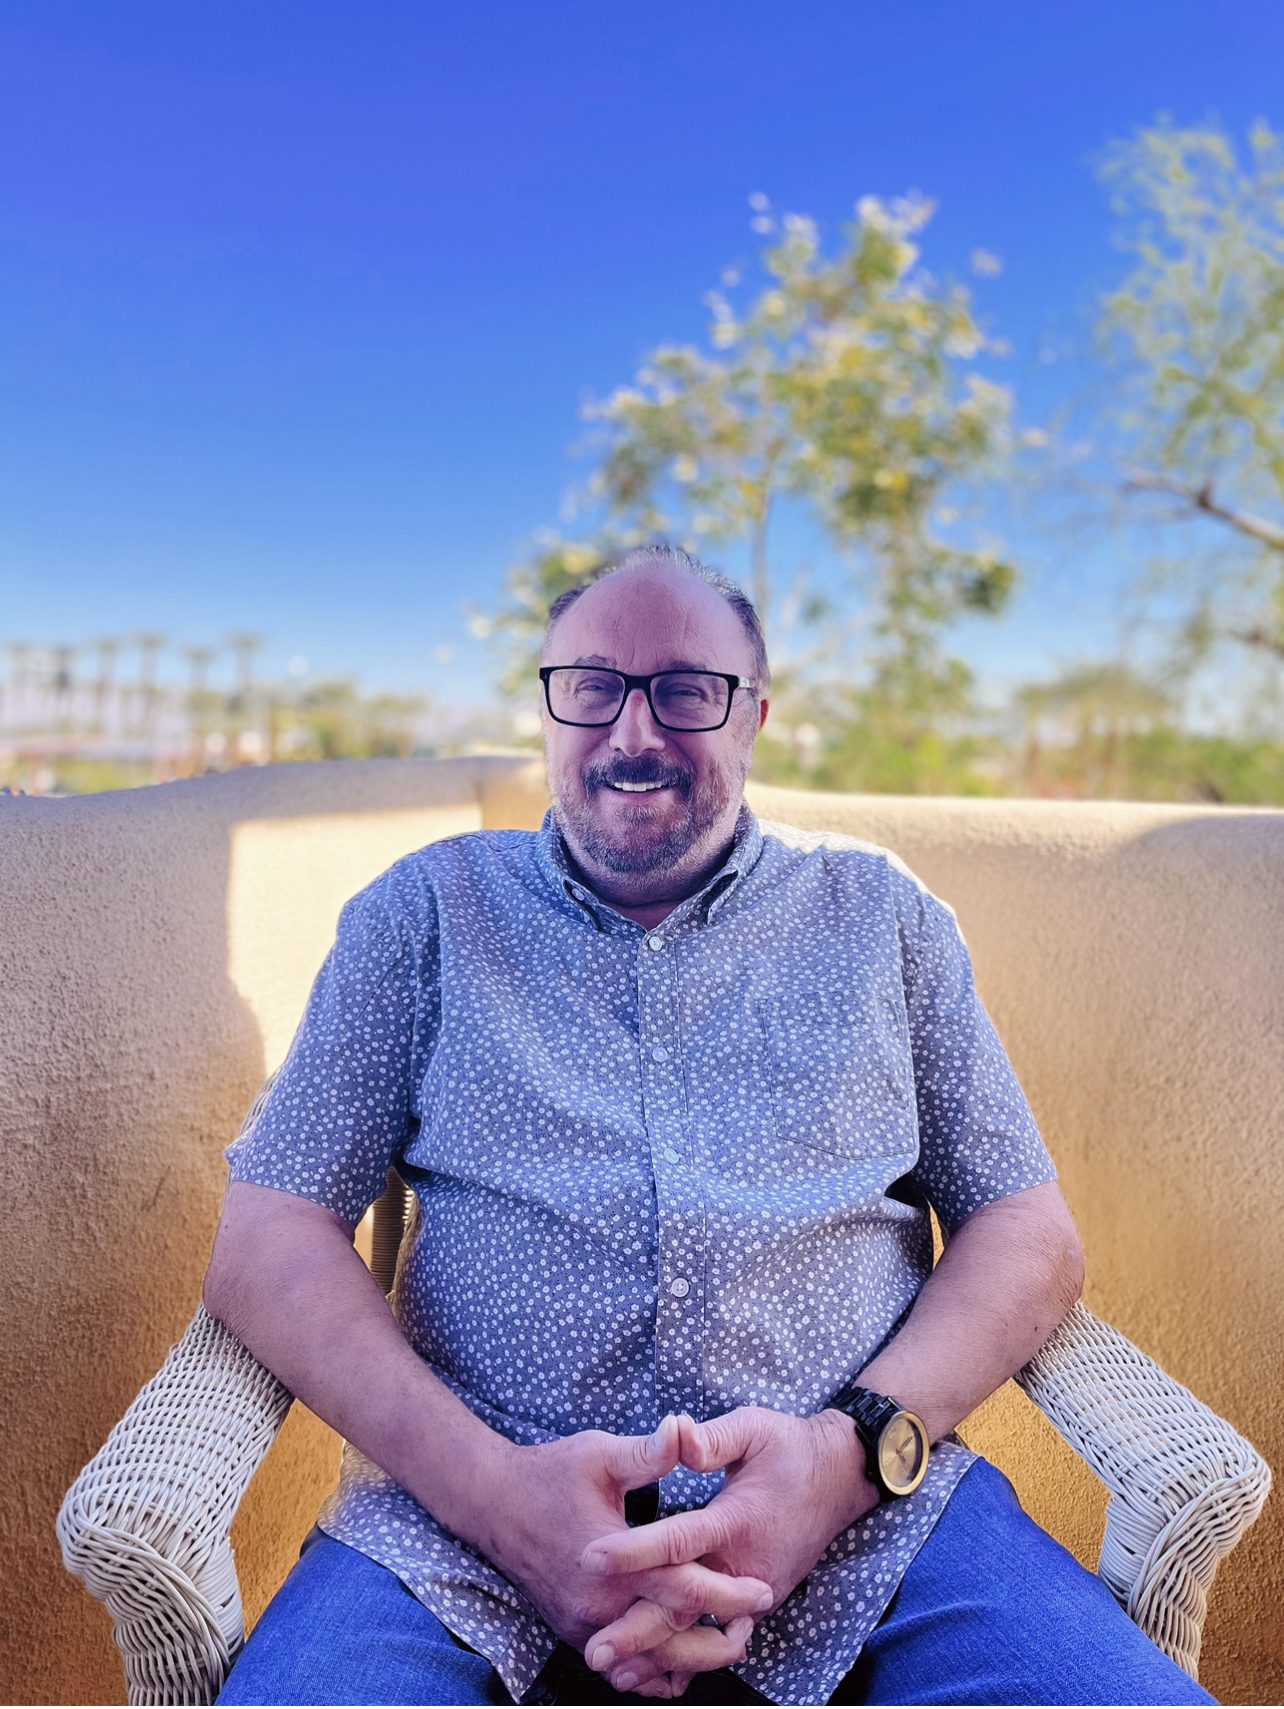 Smiling man with glasses seated outdoors on a sunny day.